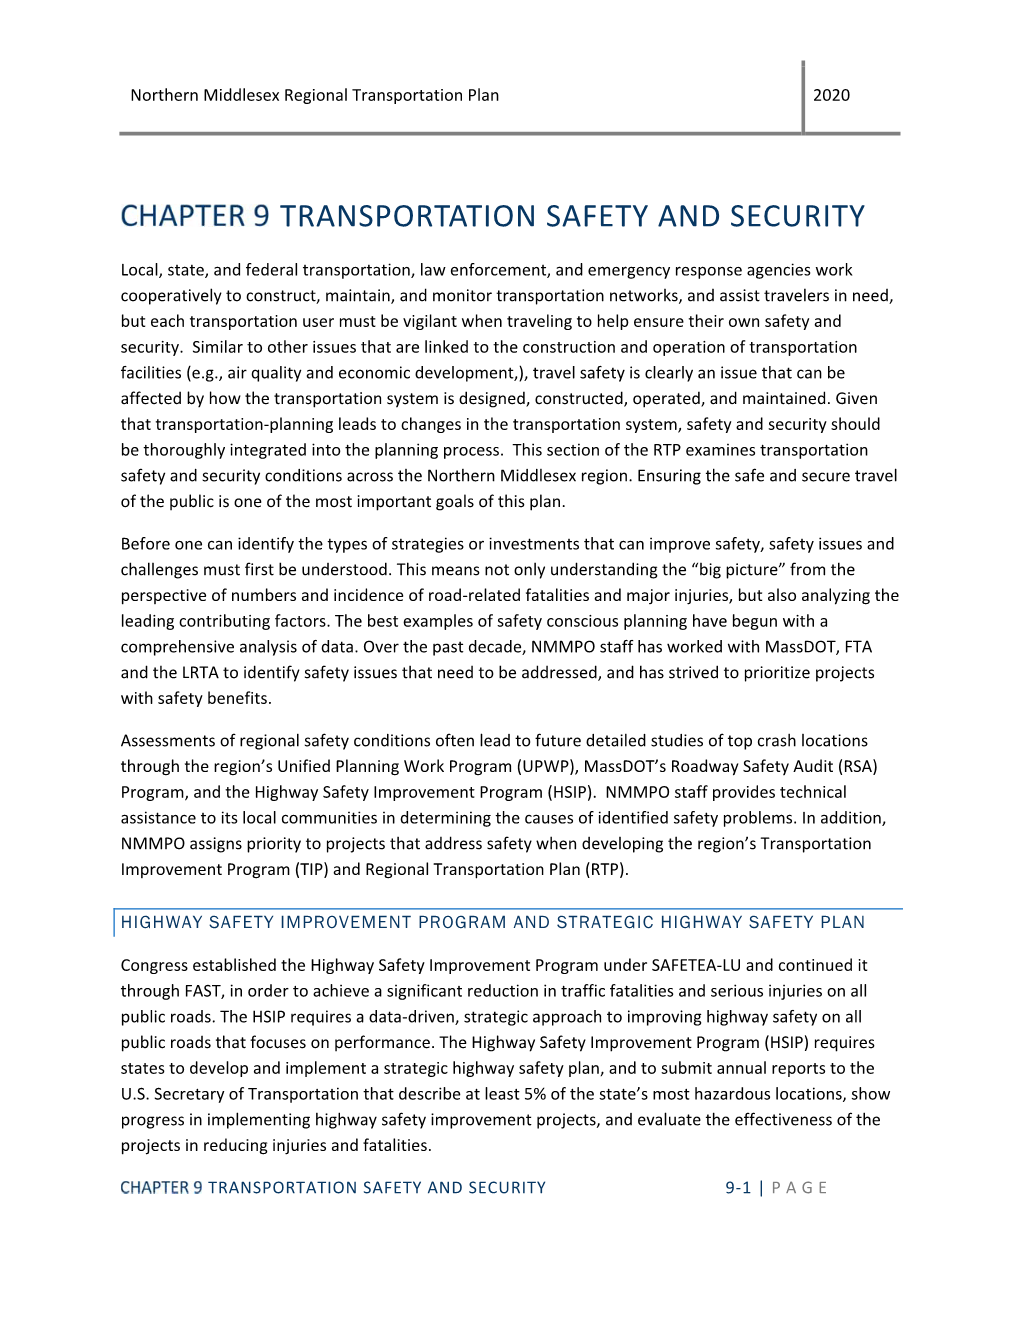 Transportation Safety and Security